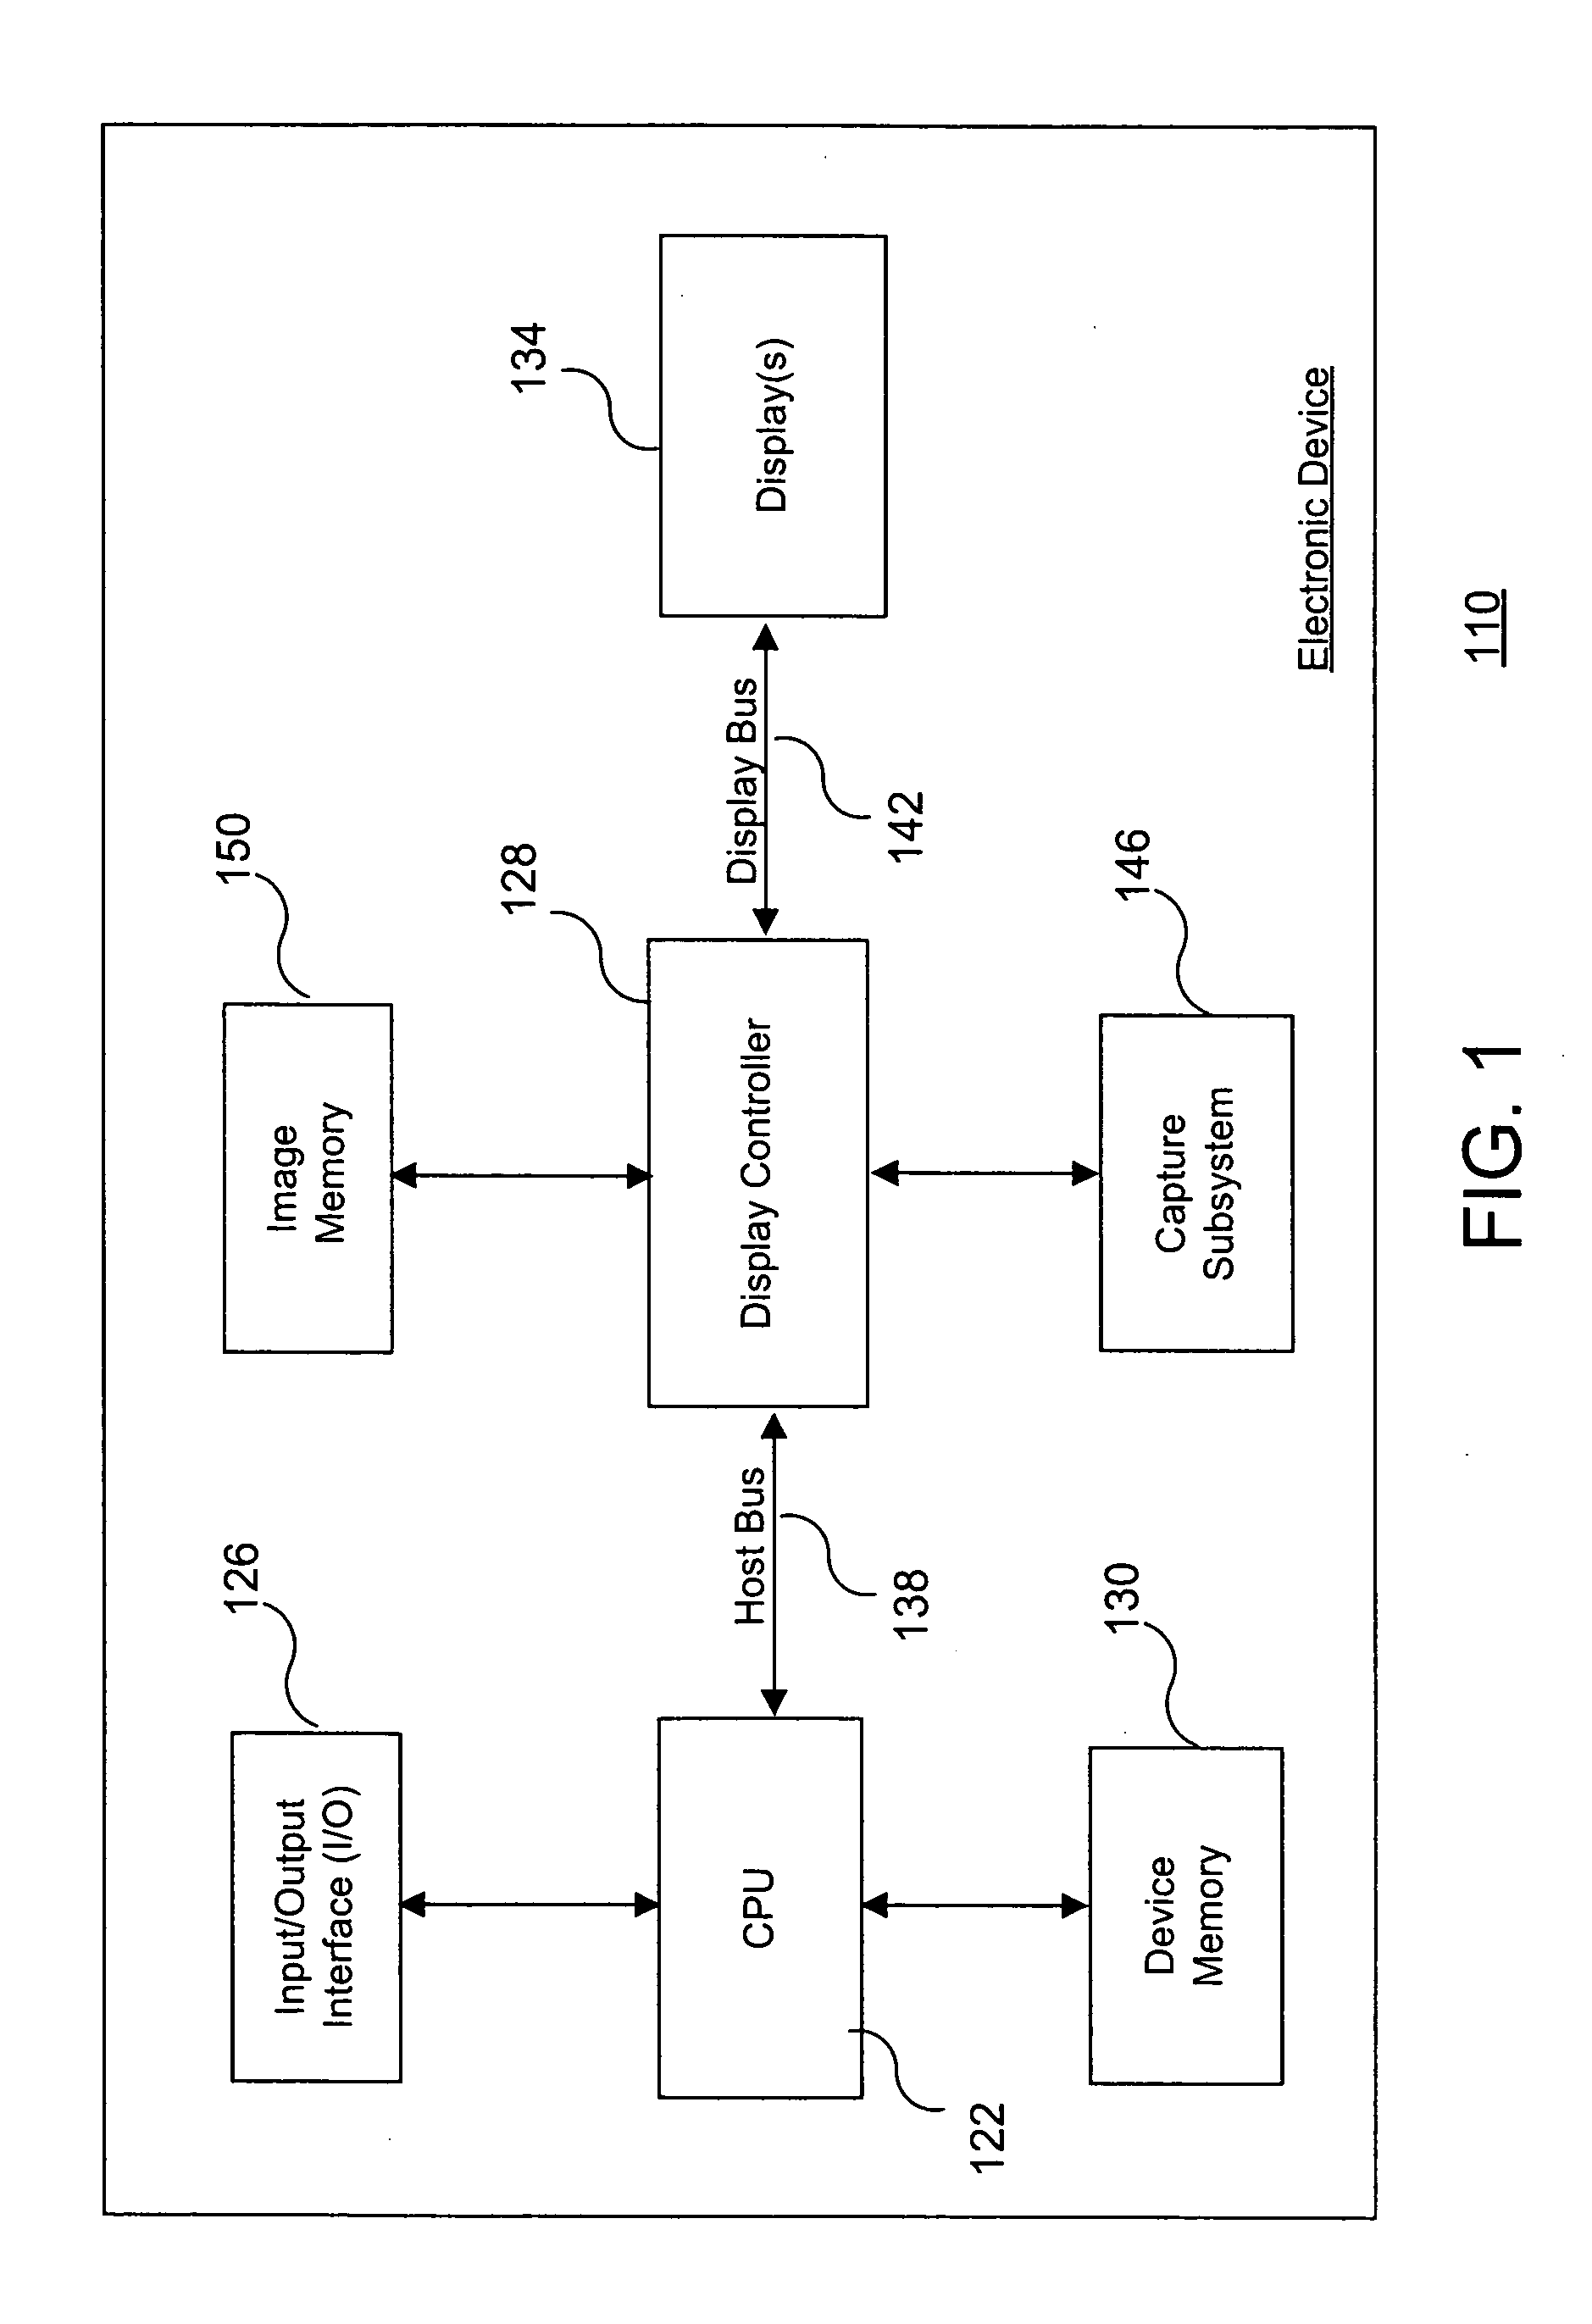 System and method for effectively utilizing a live preview mode in an electronic imaging device